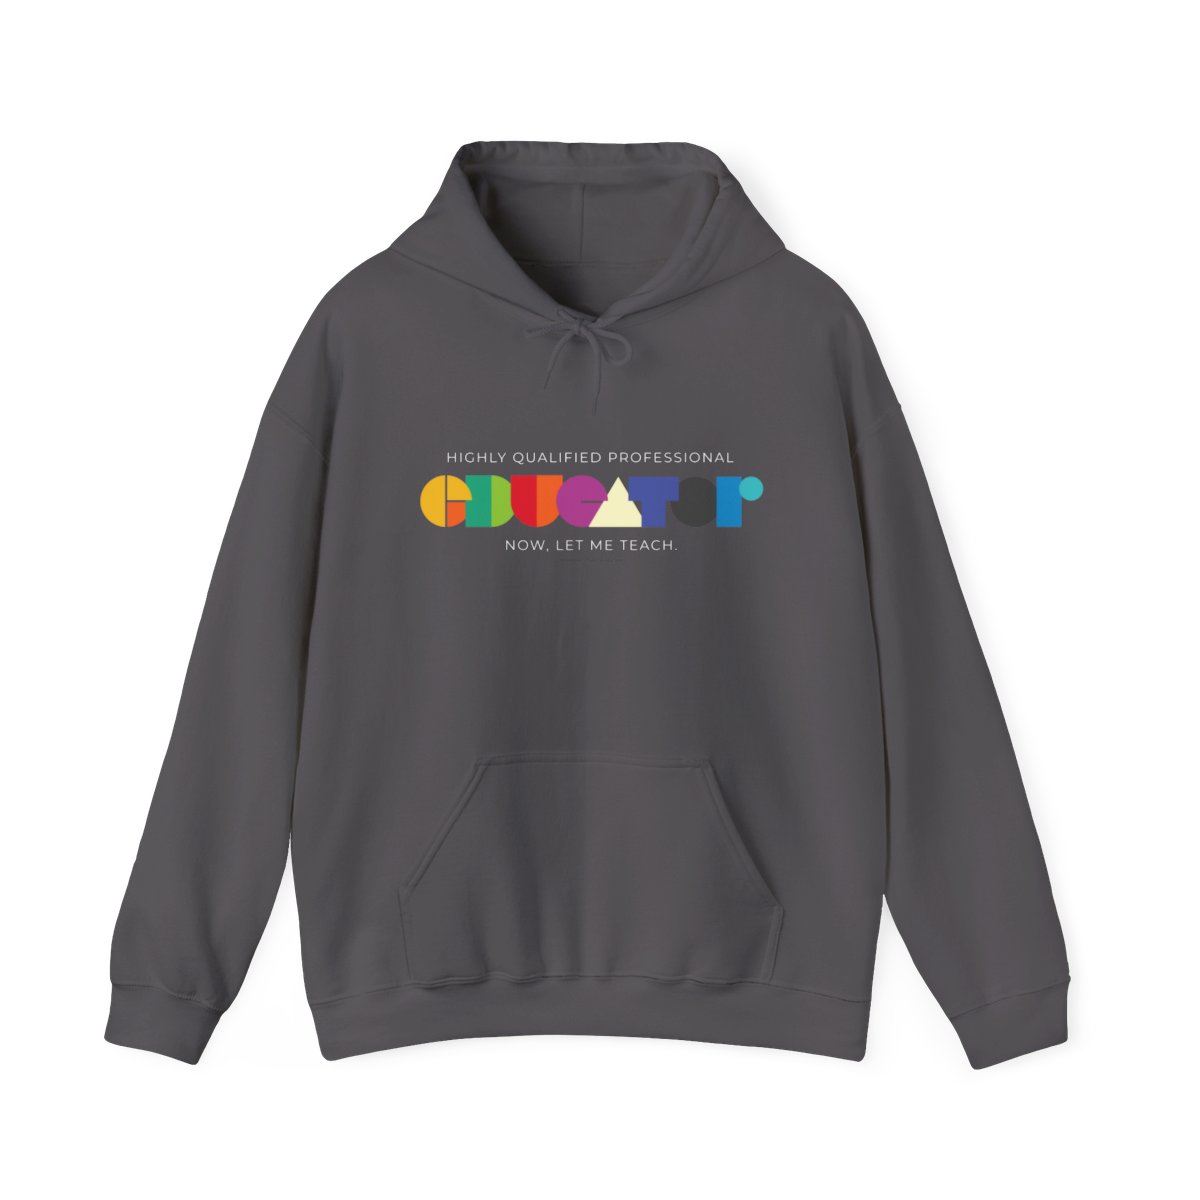 Highly Qualified Educator - Unisex Heavy Blend Hooded Sweatshirt for Teachers product thumbnail image